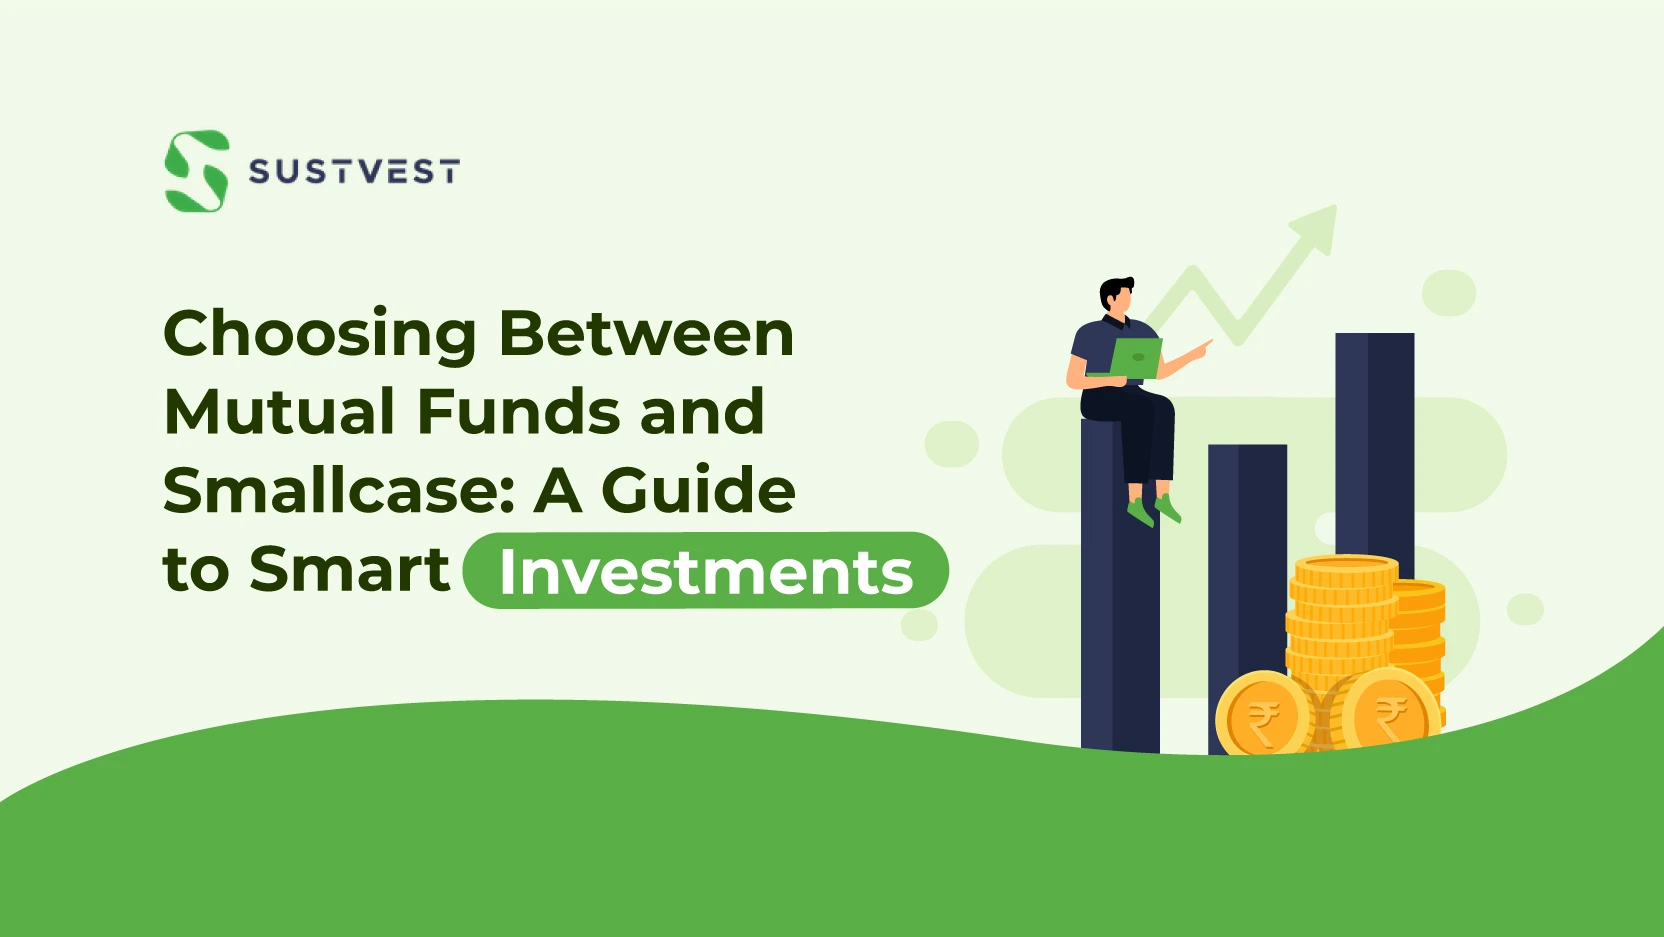 a guide to smart invetments on smallcase vs mutual fund